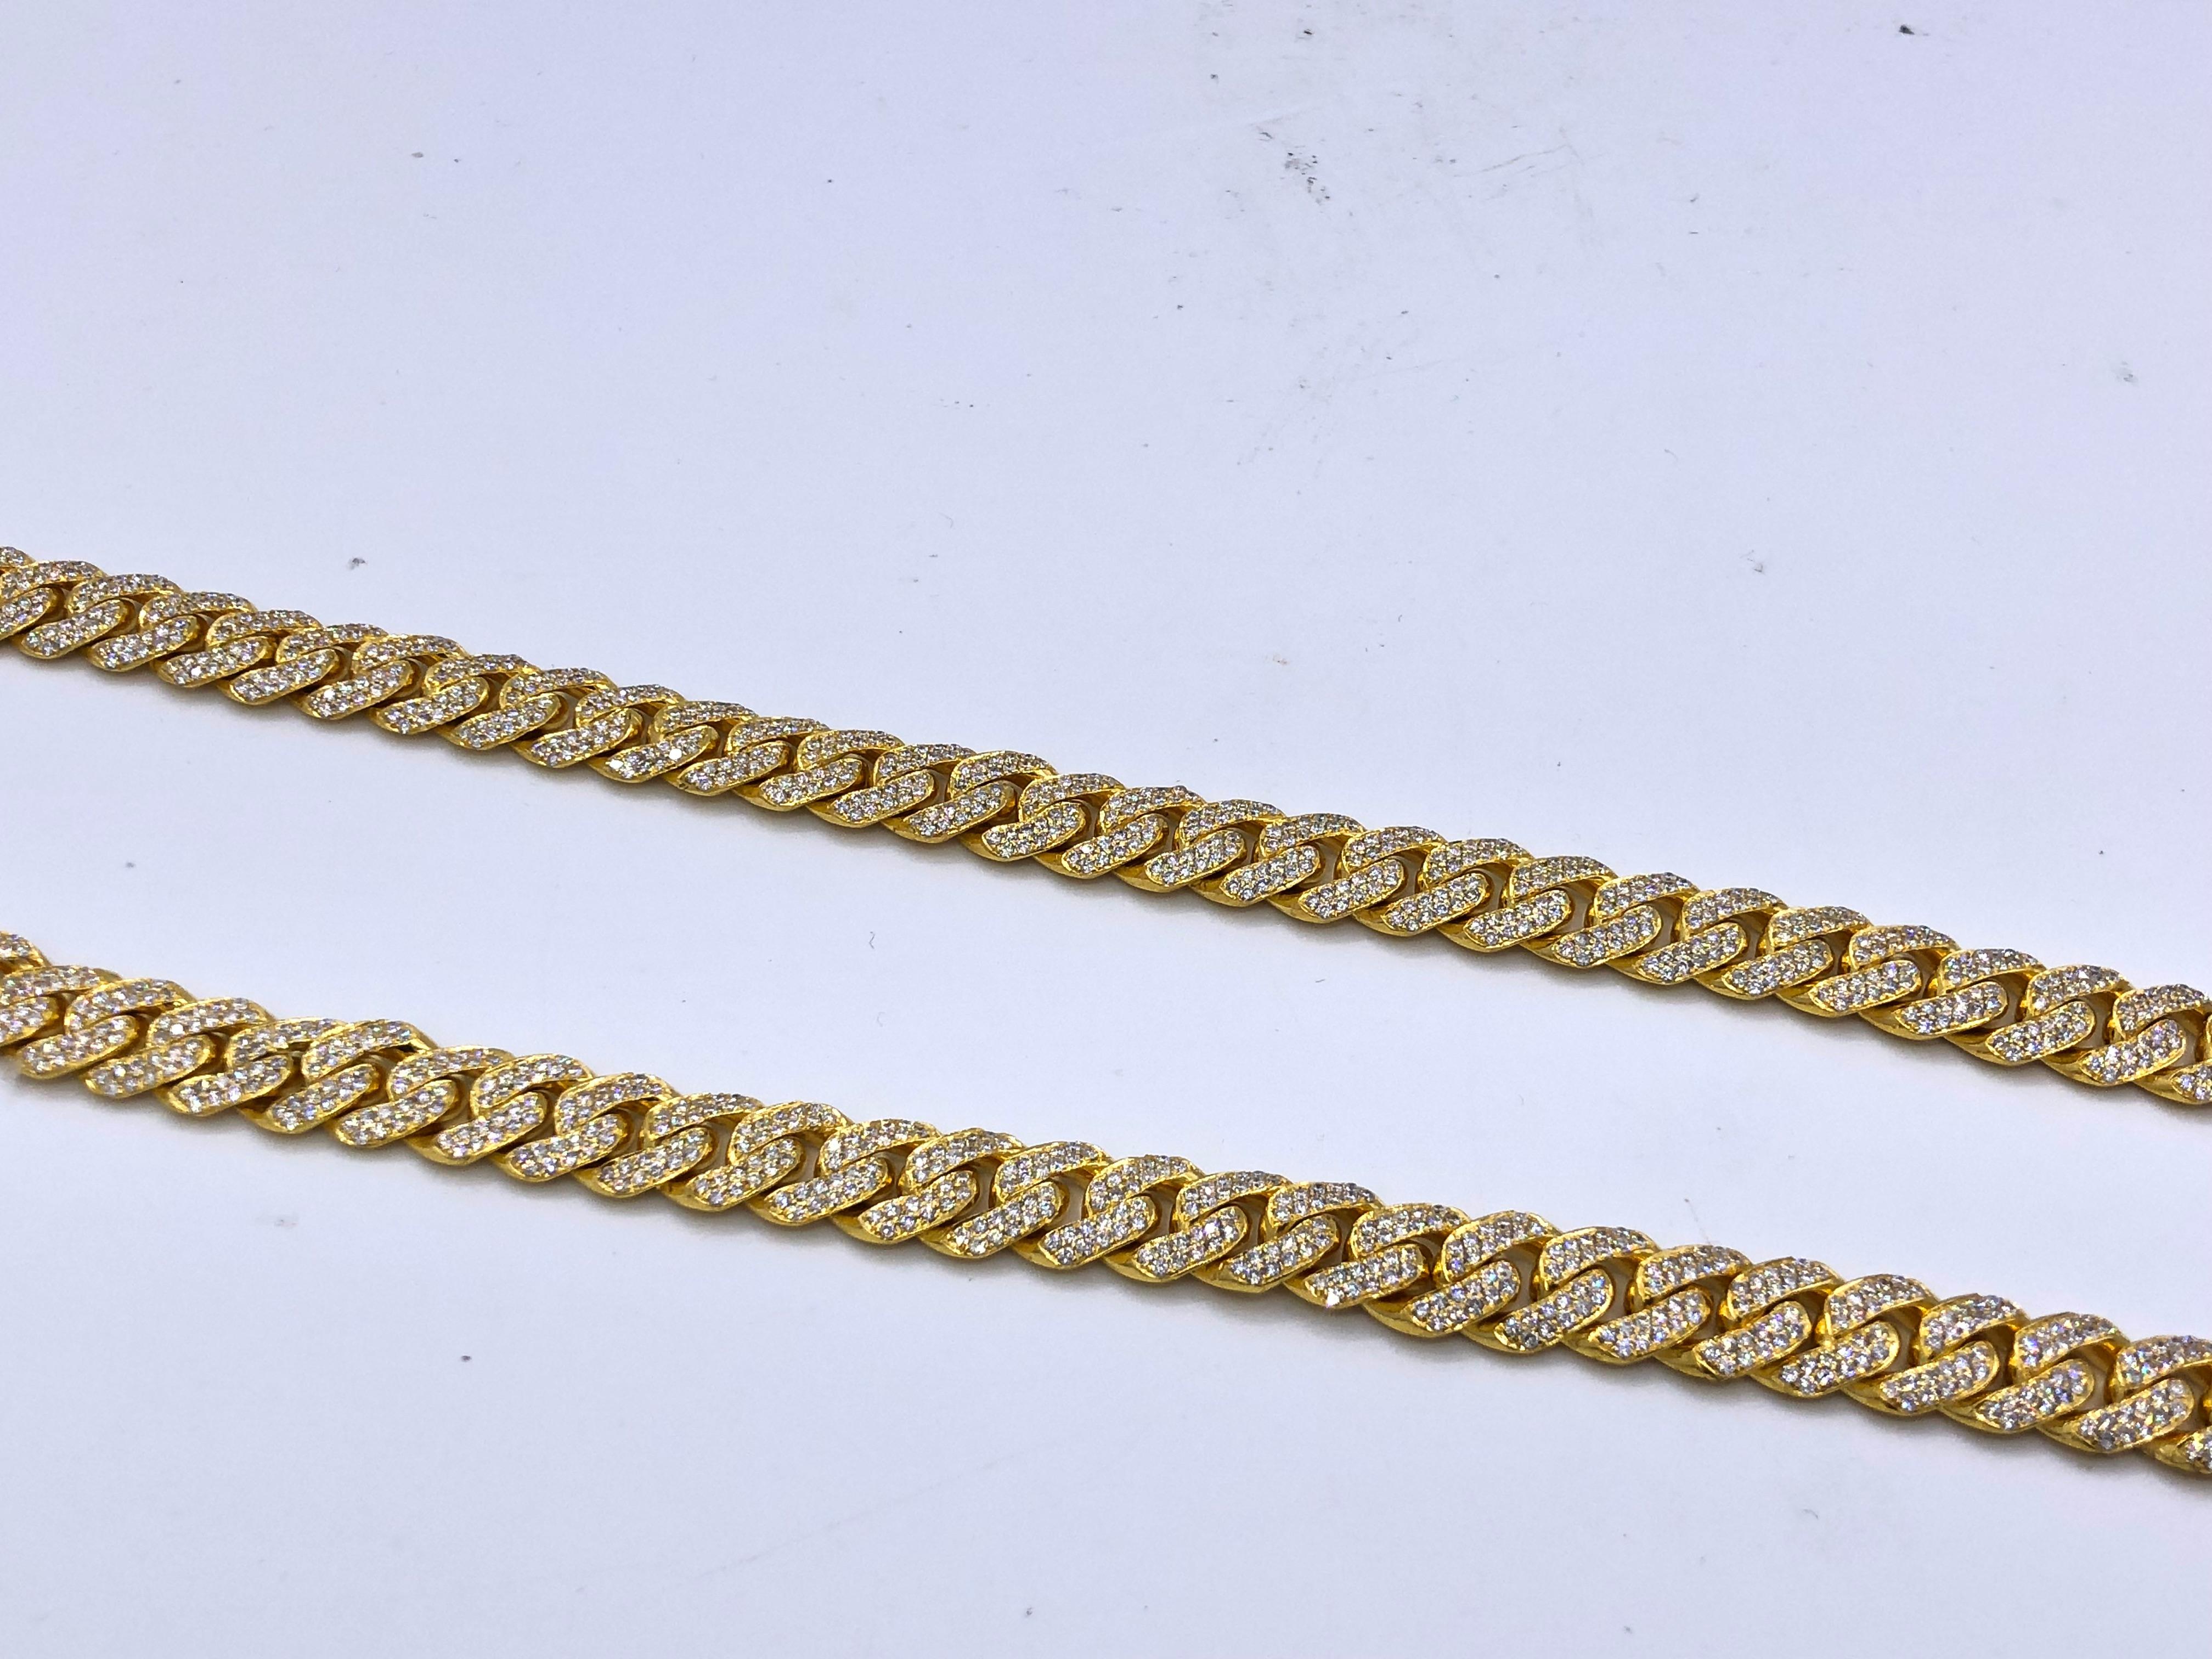 14KT yellow diamond Cuban link necklace 16.00ct total weight of pave diamonds, 24